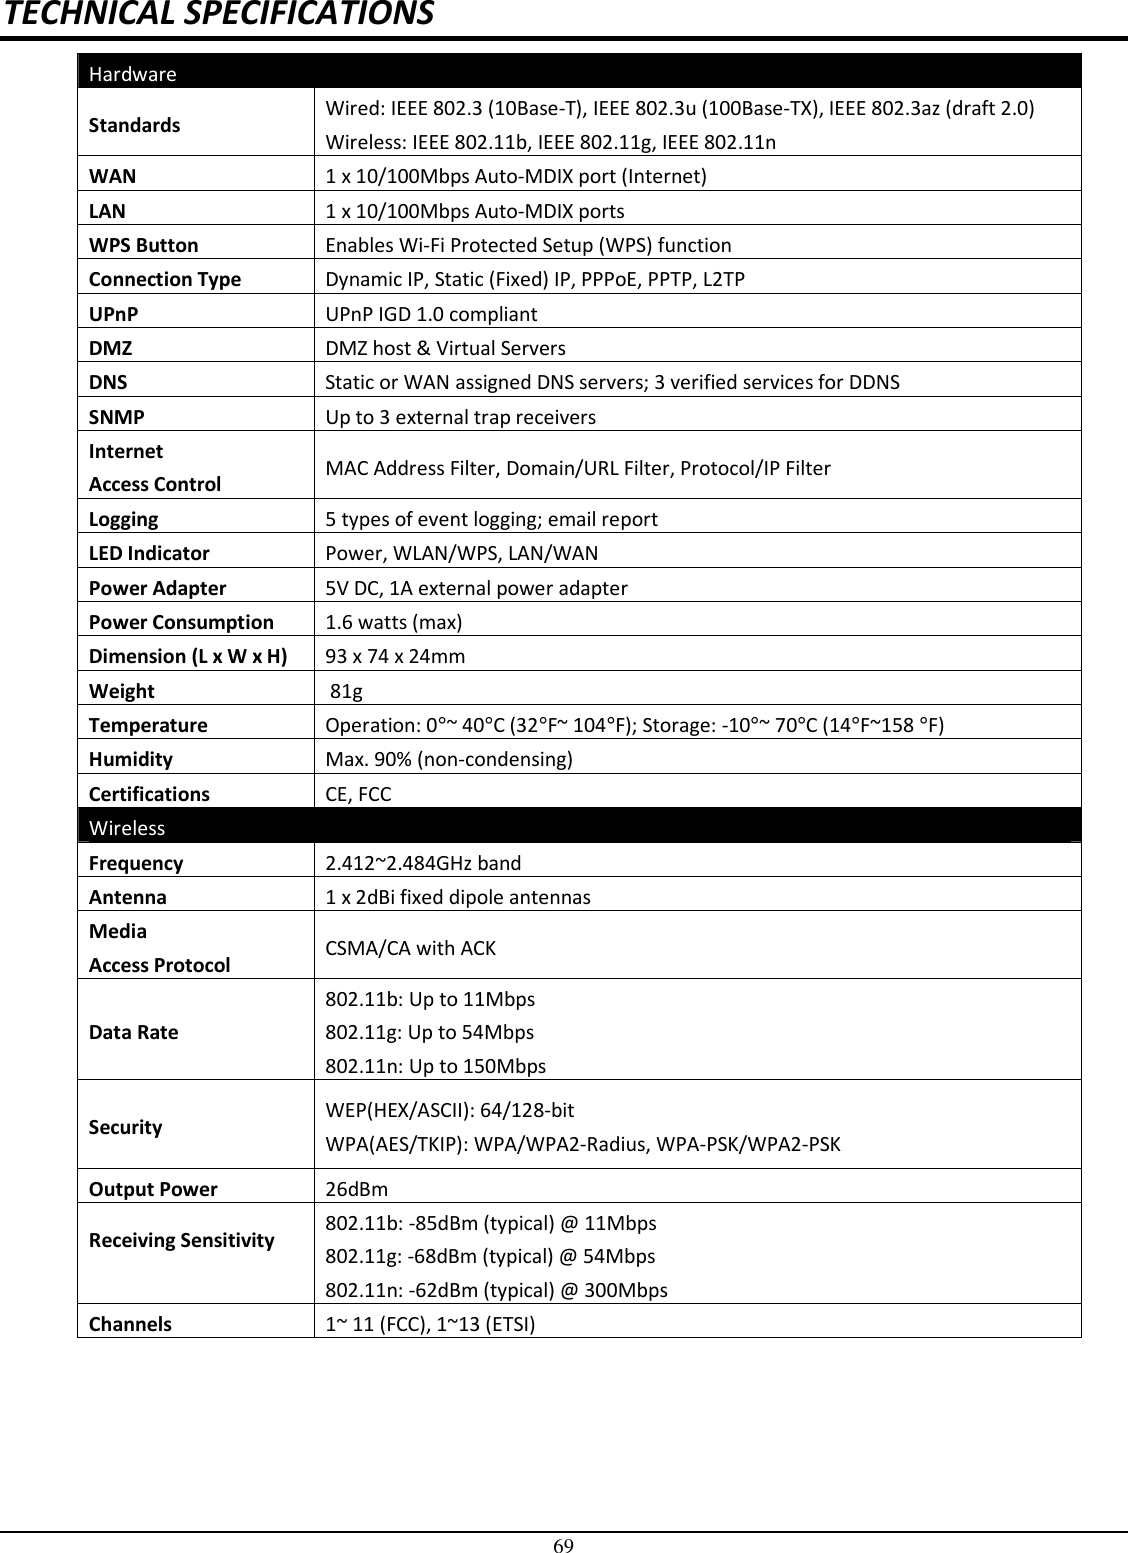 69 TECHNICAL SPECIFICATIONS Hardware Standards  Wired: IEEE 802.3 (10Base-T), IEEE 802.3u (100Base-TX), IEEE 802.3az (draft 2.0) Wireless: IEEE 802.11b, IEEE 802.11g, IEEE 802.11n WAN  1 x 10/100Mbps Auto-MDIX port (Internet) LAN   1 x 10/100Mbps Auto-MDIX ports WPS Button  Enables Wi-Fi Protected Setup (WPS) function Connection Type  Dynamic IP, Static (Fixed) IP, PPPoE, PPTP, L2TP UPnP  UPnP IGD 1.0 compliant DMZ  DMZ host &amp; Virtual Servers DNS  Static or WAN assigned DNS servers; 3 verified services for DDNS SNMP   Up to 3 external trap receivers Internet  Access Control  MAC Address Filter, Domain/URL Filter, Protocol/IP Filter Logging  5 types of event logging; email report  LED Indicator  Power, WLAN/WPS, LAN/WAN Power Adapter  5V DC, 1A external power adapter Power Consumption  1.6 watts (max) Dimension (L x W x H)  93 x 74 x 24mm Weight   81g  Temperature  Operation: 0°~ 40°C (32°F~ 104°F); Storage: -10°~ 70°C (14°F~158 °F) Humidity  Max. 90% (non-condensing) Certifications  CE, FCC Wireless Frequency  2.412~2.484GHz band Antenna  1 x 2dBi fixed dipole antennas Media  Access Protocol  CSMA/CA with ACK Data Rate 802.11b: Up to 11Mbps 802.11g: Up to 54Mbps 802.11n: Up to 150Mbps Security  WEP(HEX/ASCII): 64/128-bit  WPA(AES/TKIP): WPA/WPA2-Radius, WPA-PSK/WPA2-PSK  Output Power  26dBm  Receiving Sensitivity  802.11b: -85dBm (typical) @ 11Mbps 802.11g: -68dBm (typical) @ 54Mbps 802.11n: -62dBm (typical) @ 300Mbps Channels  1~ 11 (FCC), 1~13 (ETSI) 